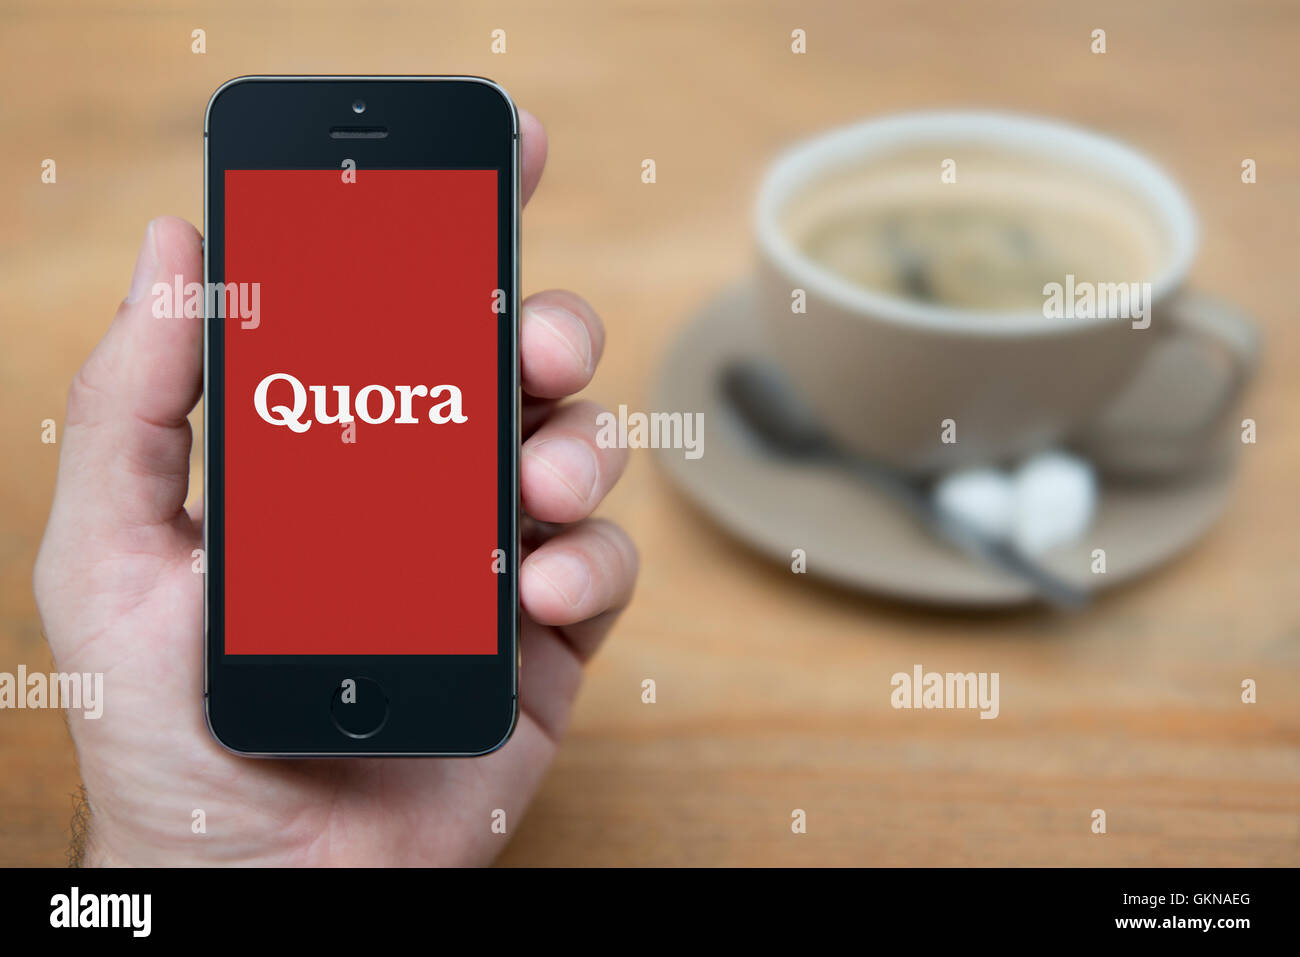 A man looks at his iPhone which displays the Quora logo, while sat with a cup of coffee (Editorial use only). Stock Photo